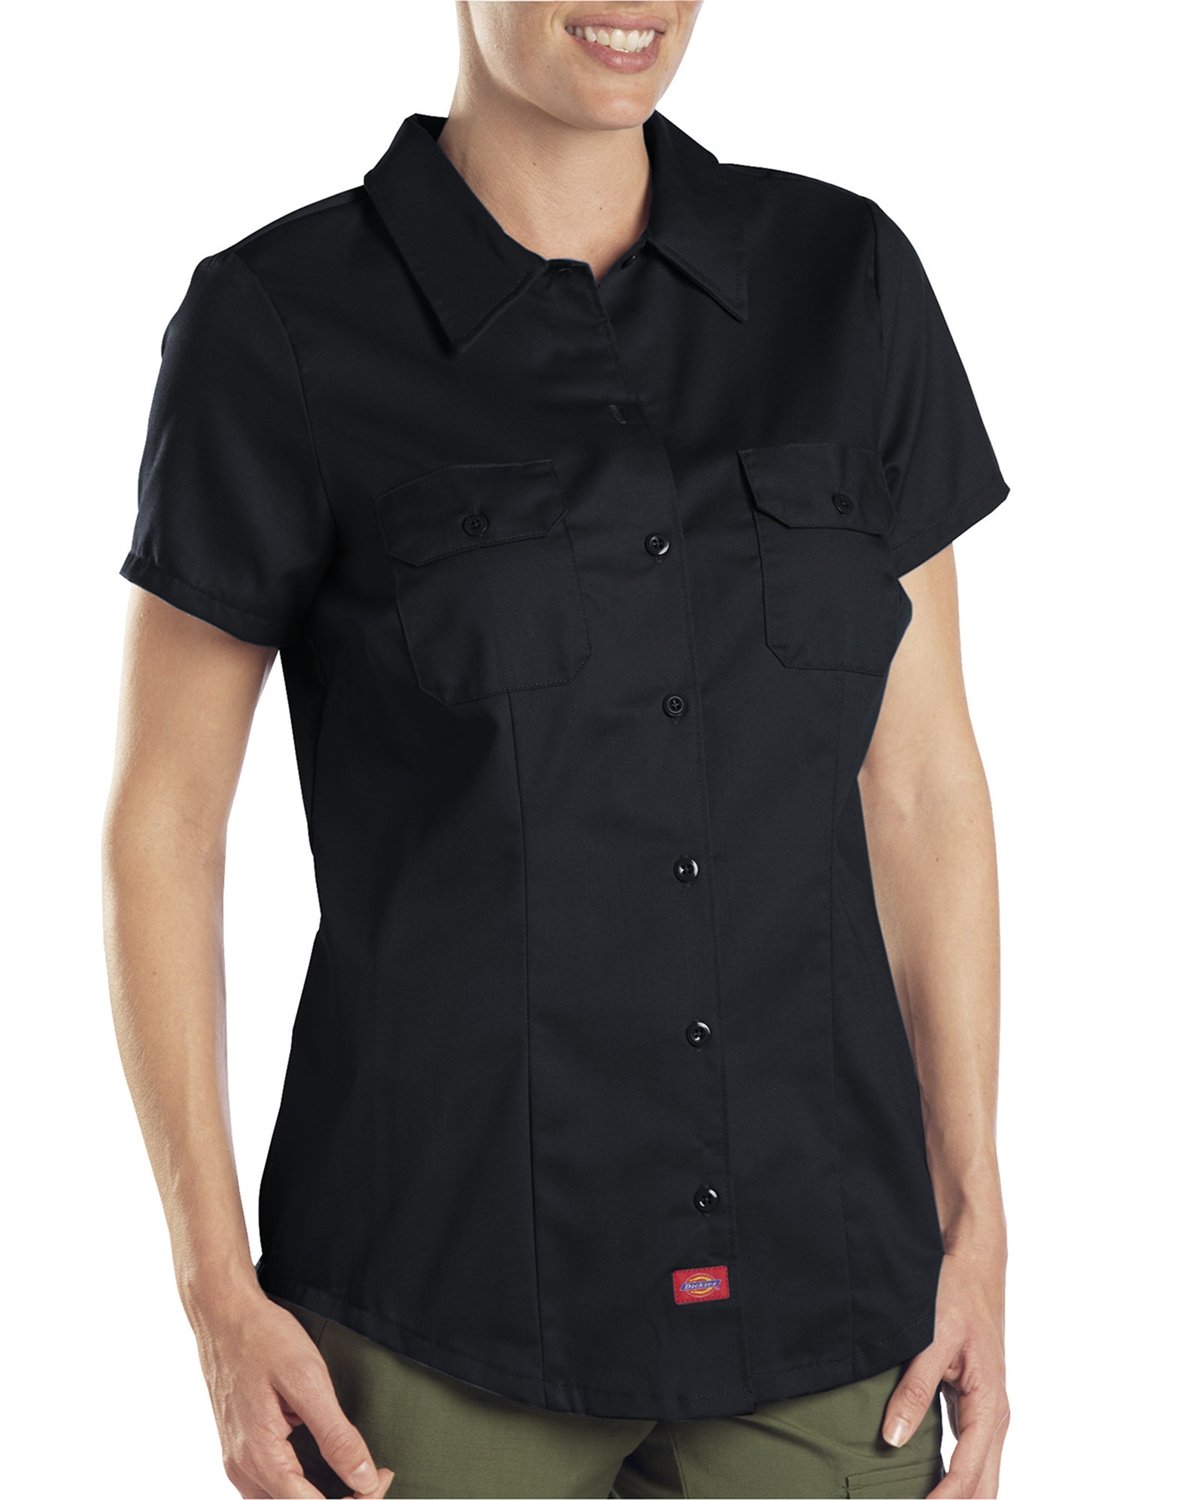 Front view of Short-Sleeve Work Shirt